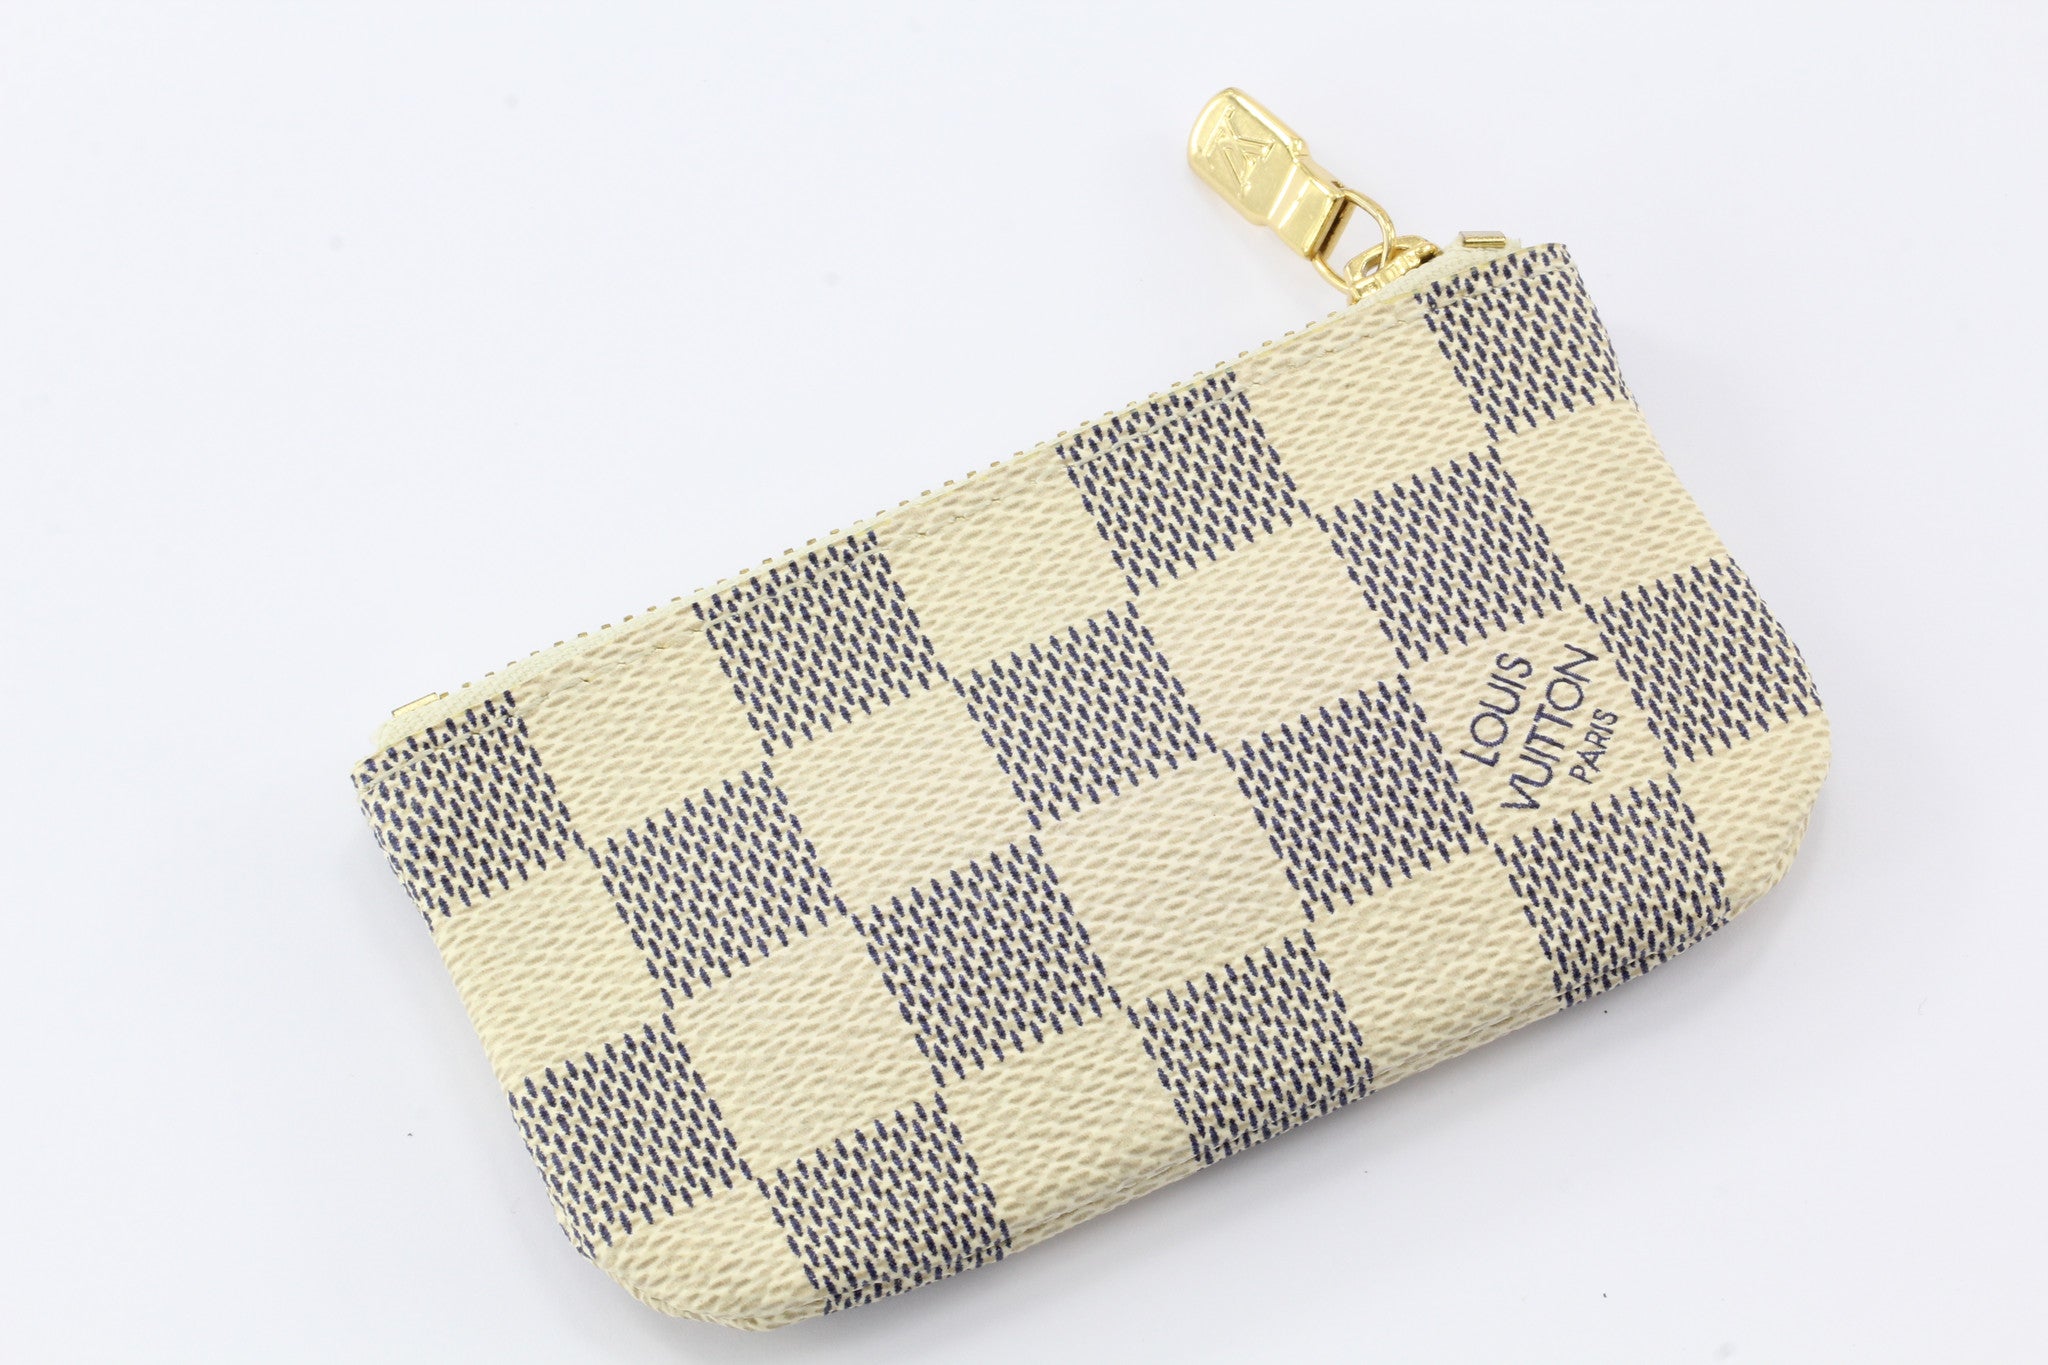 Limited Edition Louis Vuitton Damier Azur Complice Trunks and Bags Key Pouch